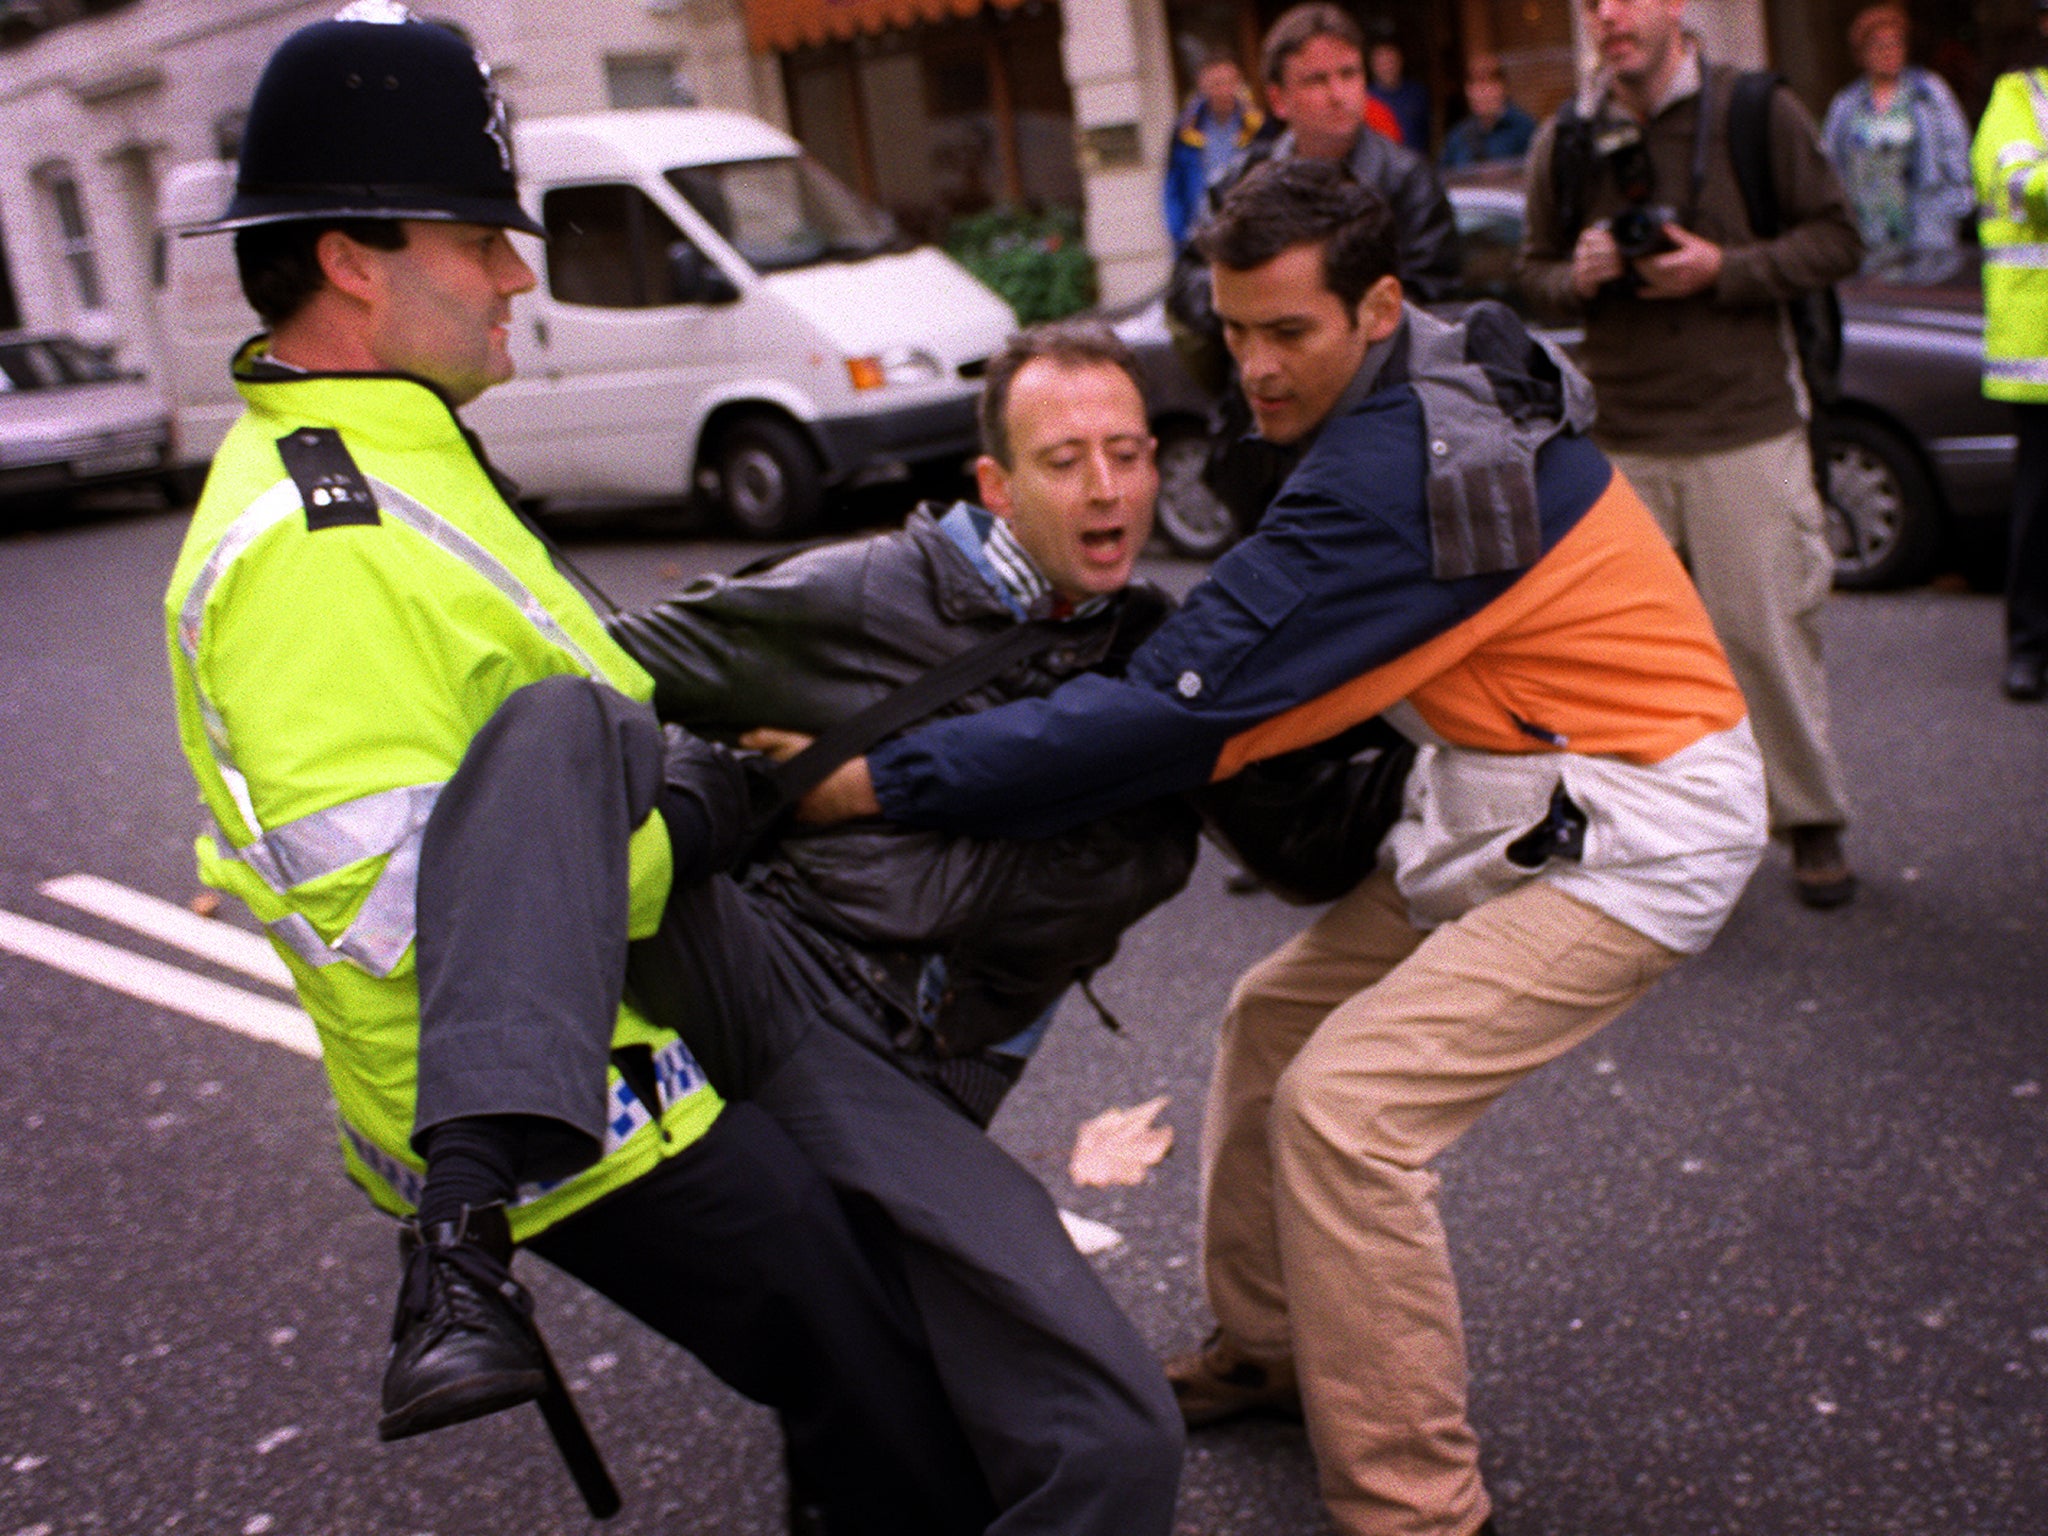 A rights tussle: Peter Tatchell attempts to arrest Robert Mugabe in 1999, in London